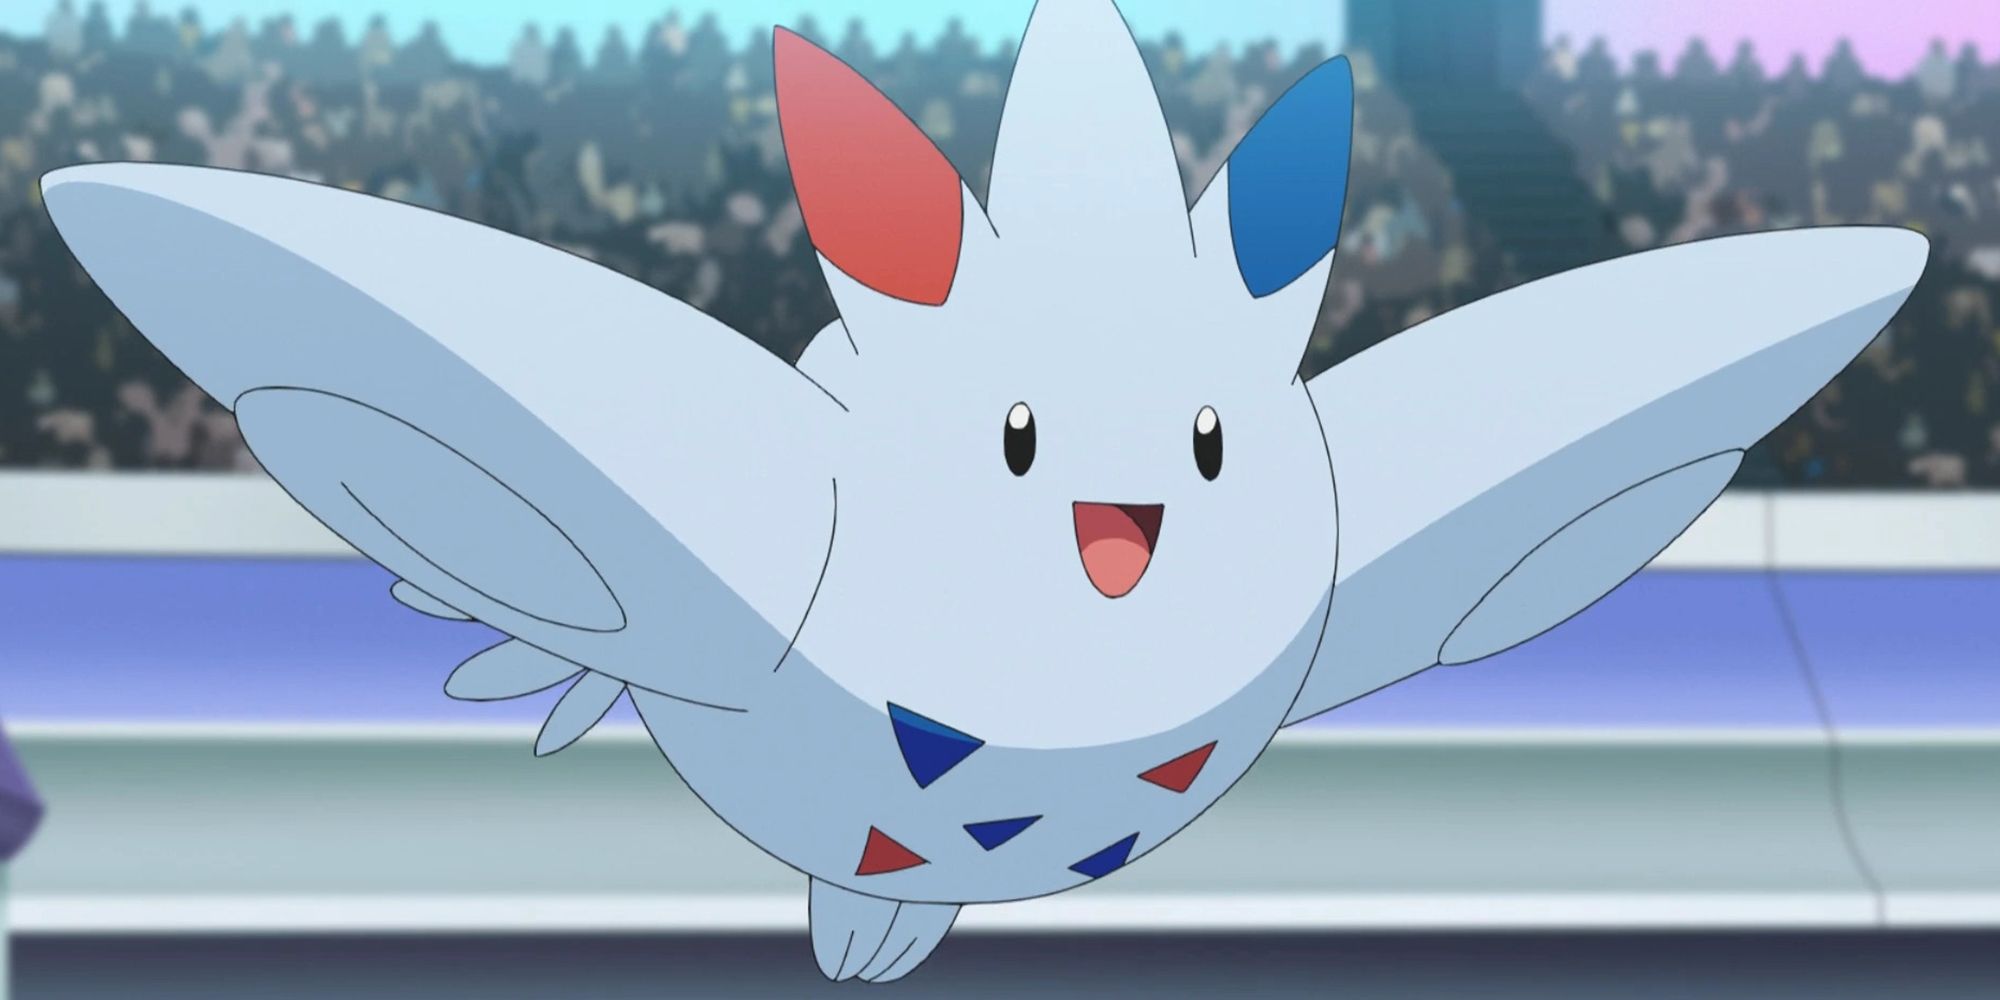 Togekiss hovers in the air with a happy look on its face